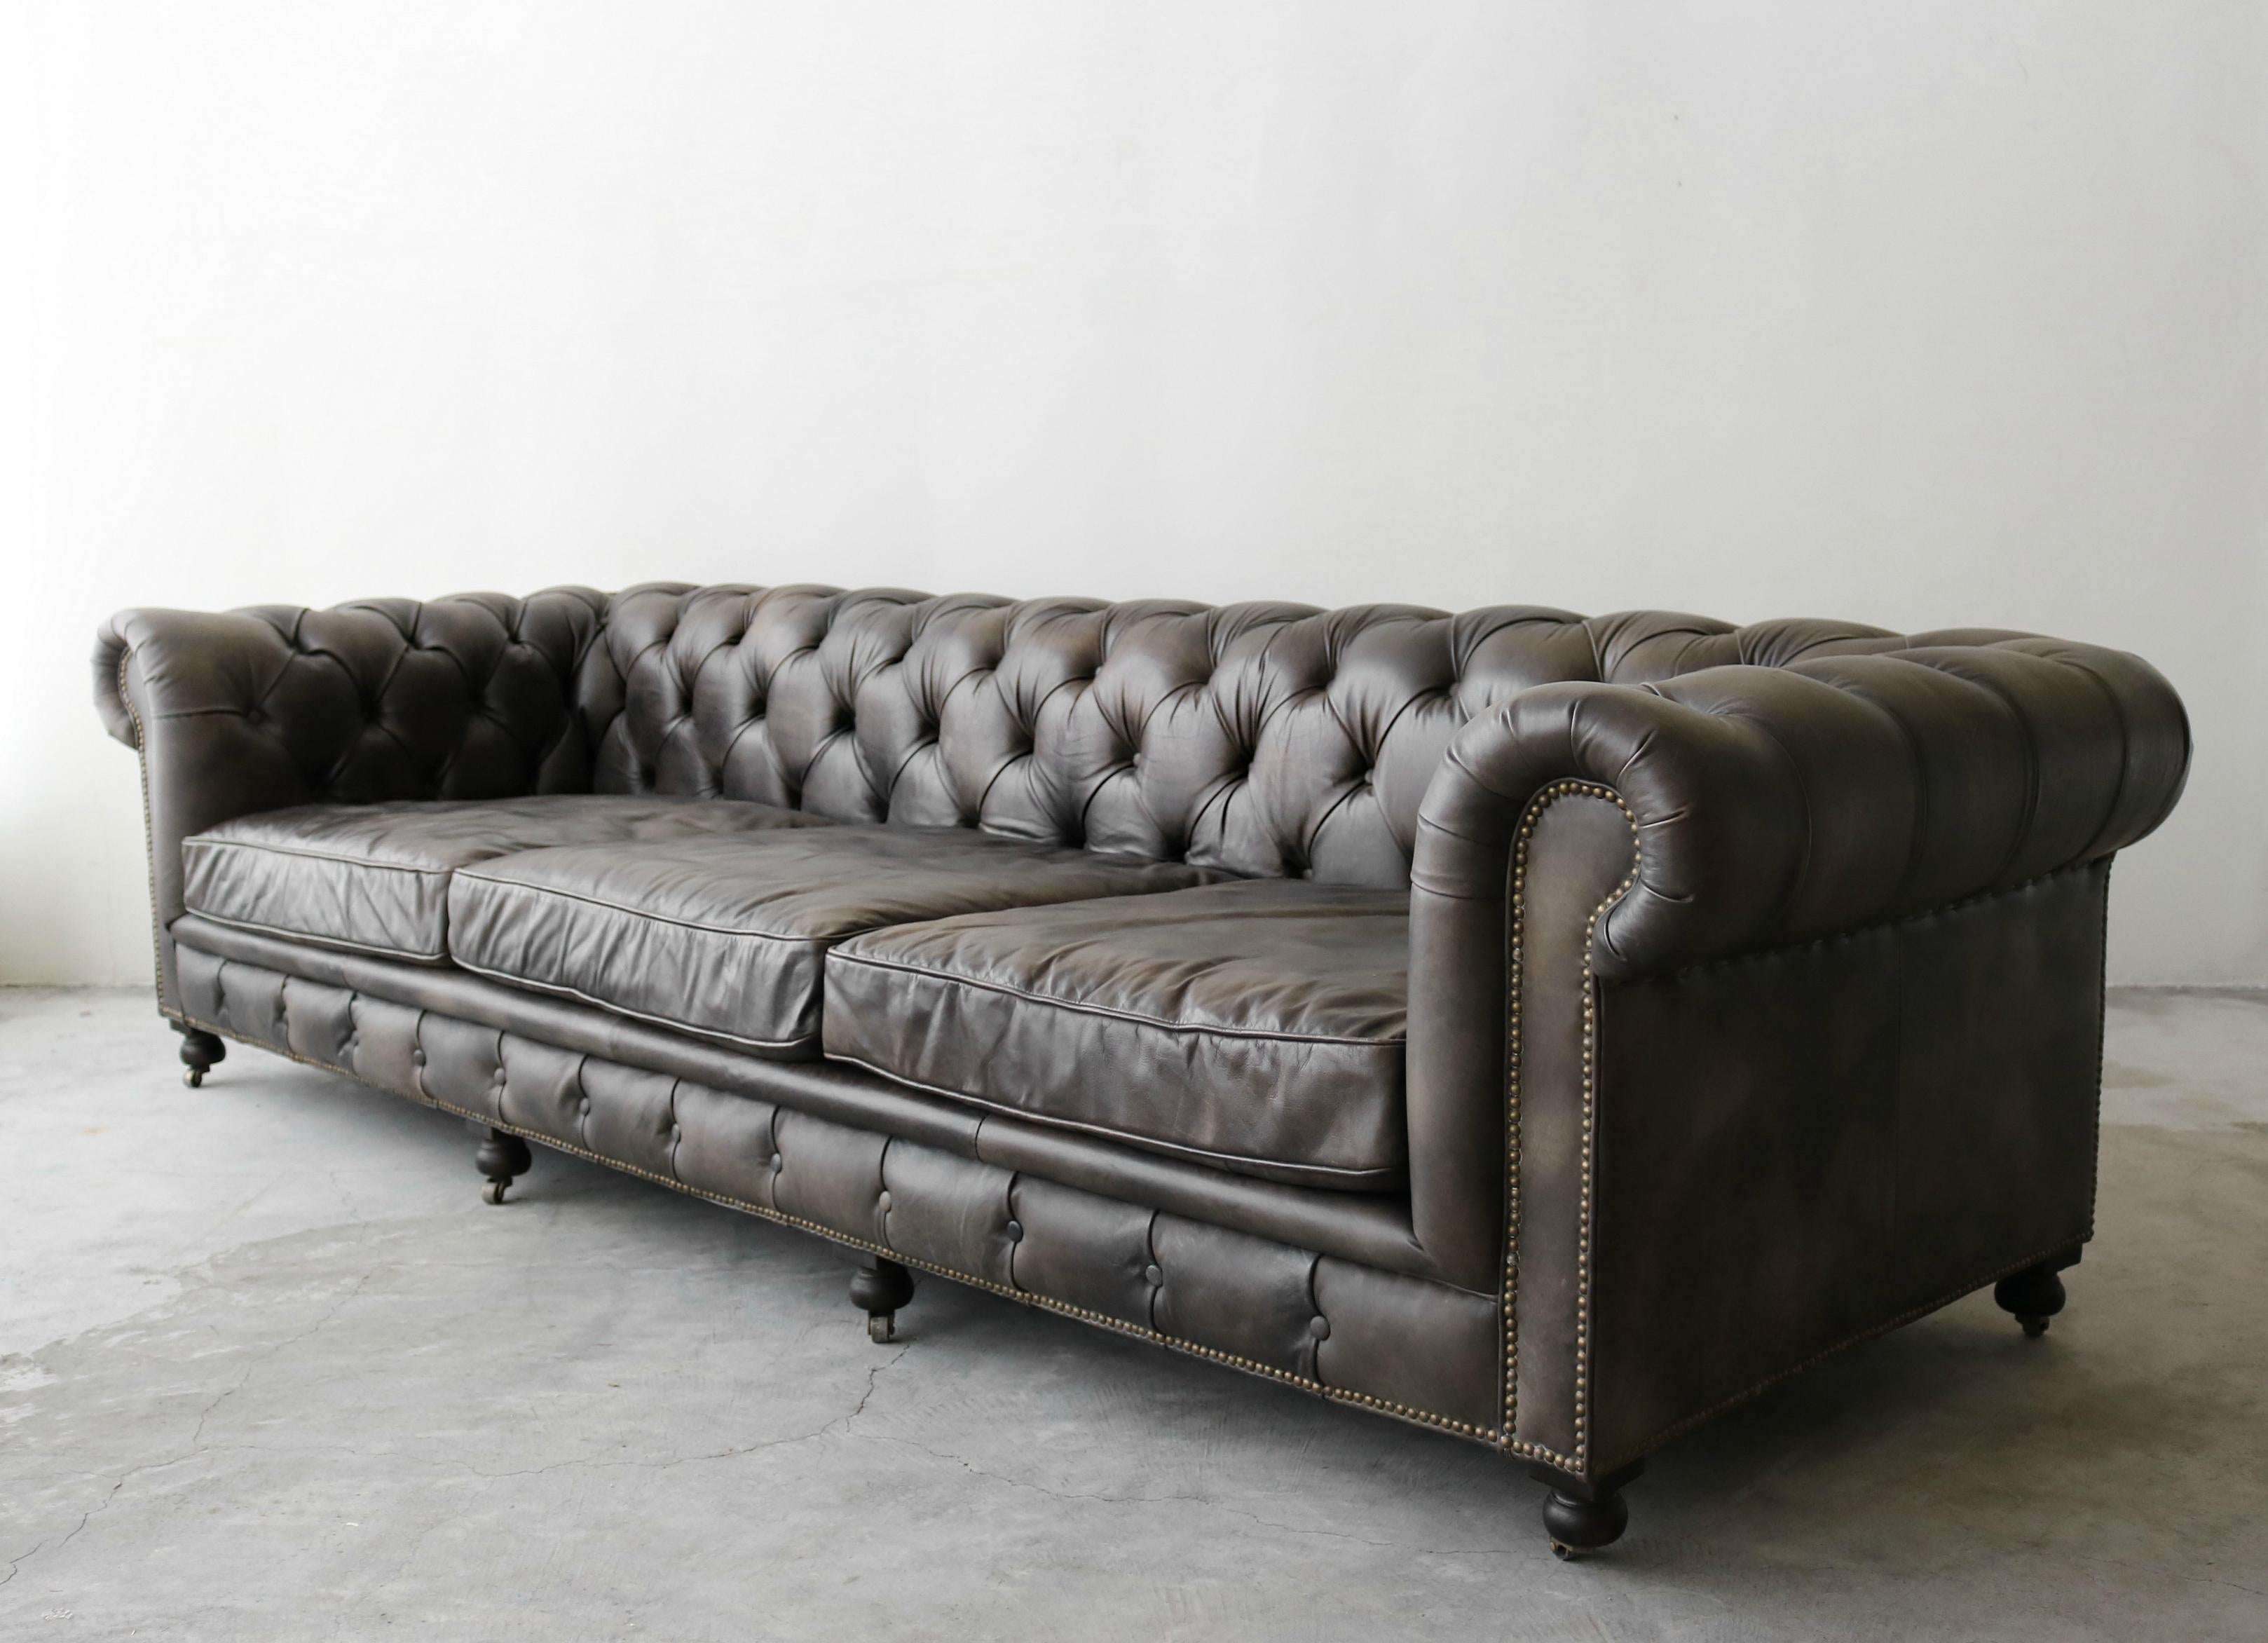 Oversized, comfortable and downright beautiful. This chesterfield is a hearty dose of functionality and style. It comes with all the style and charm of a classic chesterfield but the large size and down filled cushions make it completely usable as a